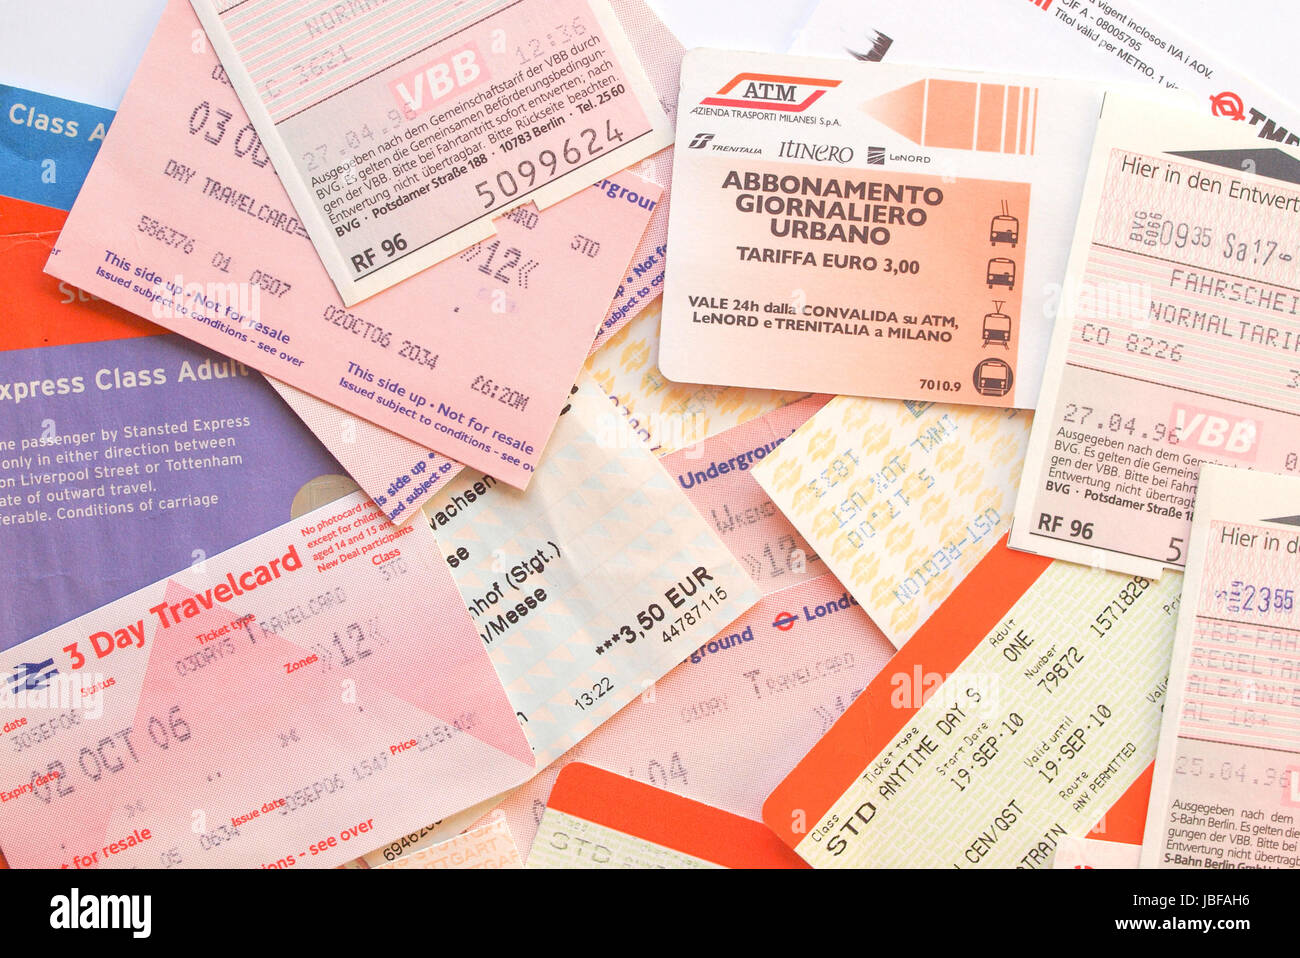 LONDON, UK - FEBRUARY 6, 2014: Set of tickets and travel cards for public transport in European cities including London Berlin Milan Stock Photo